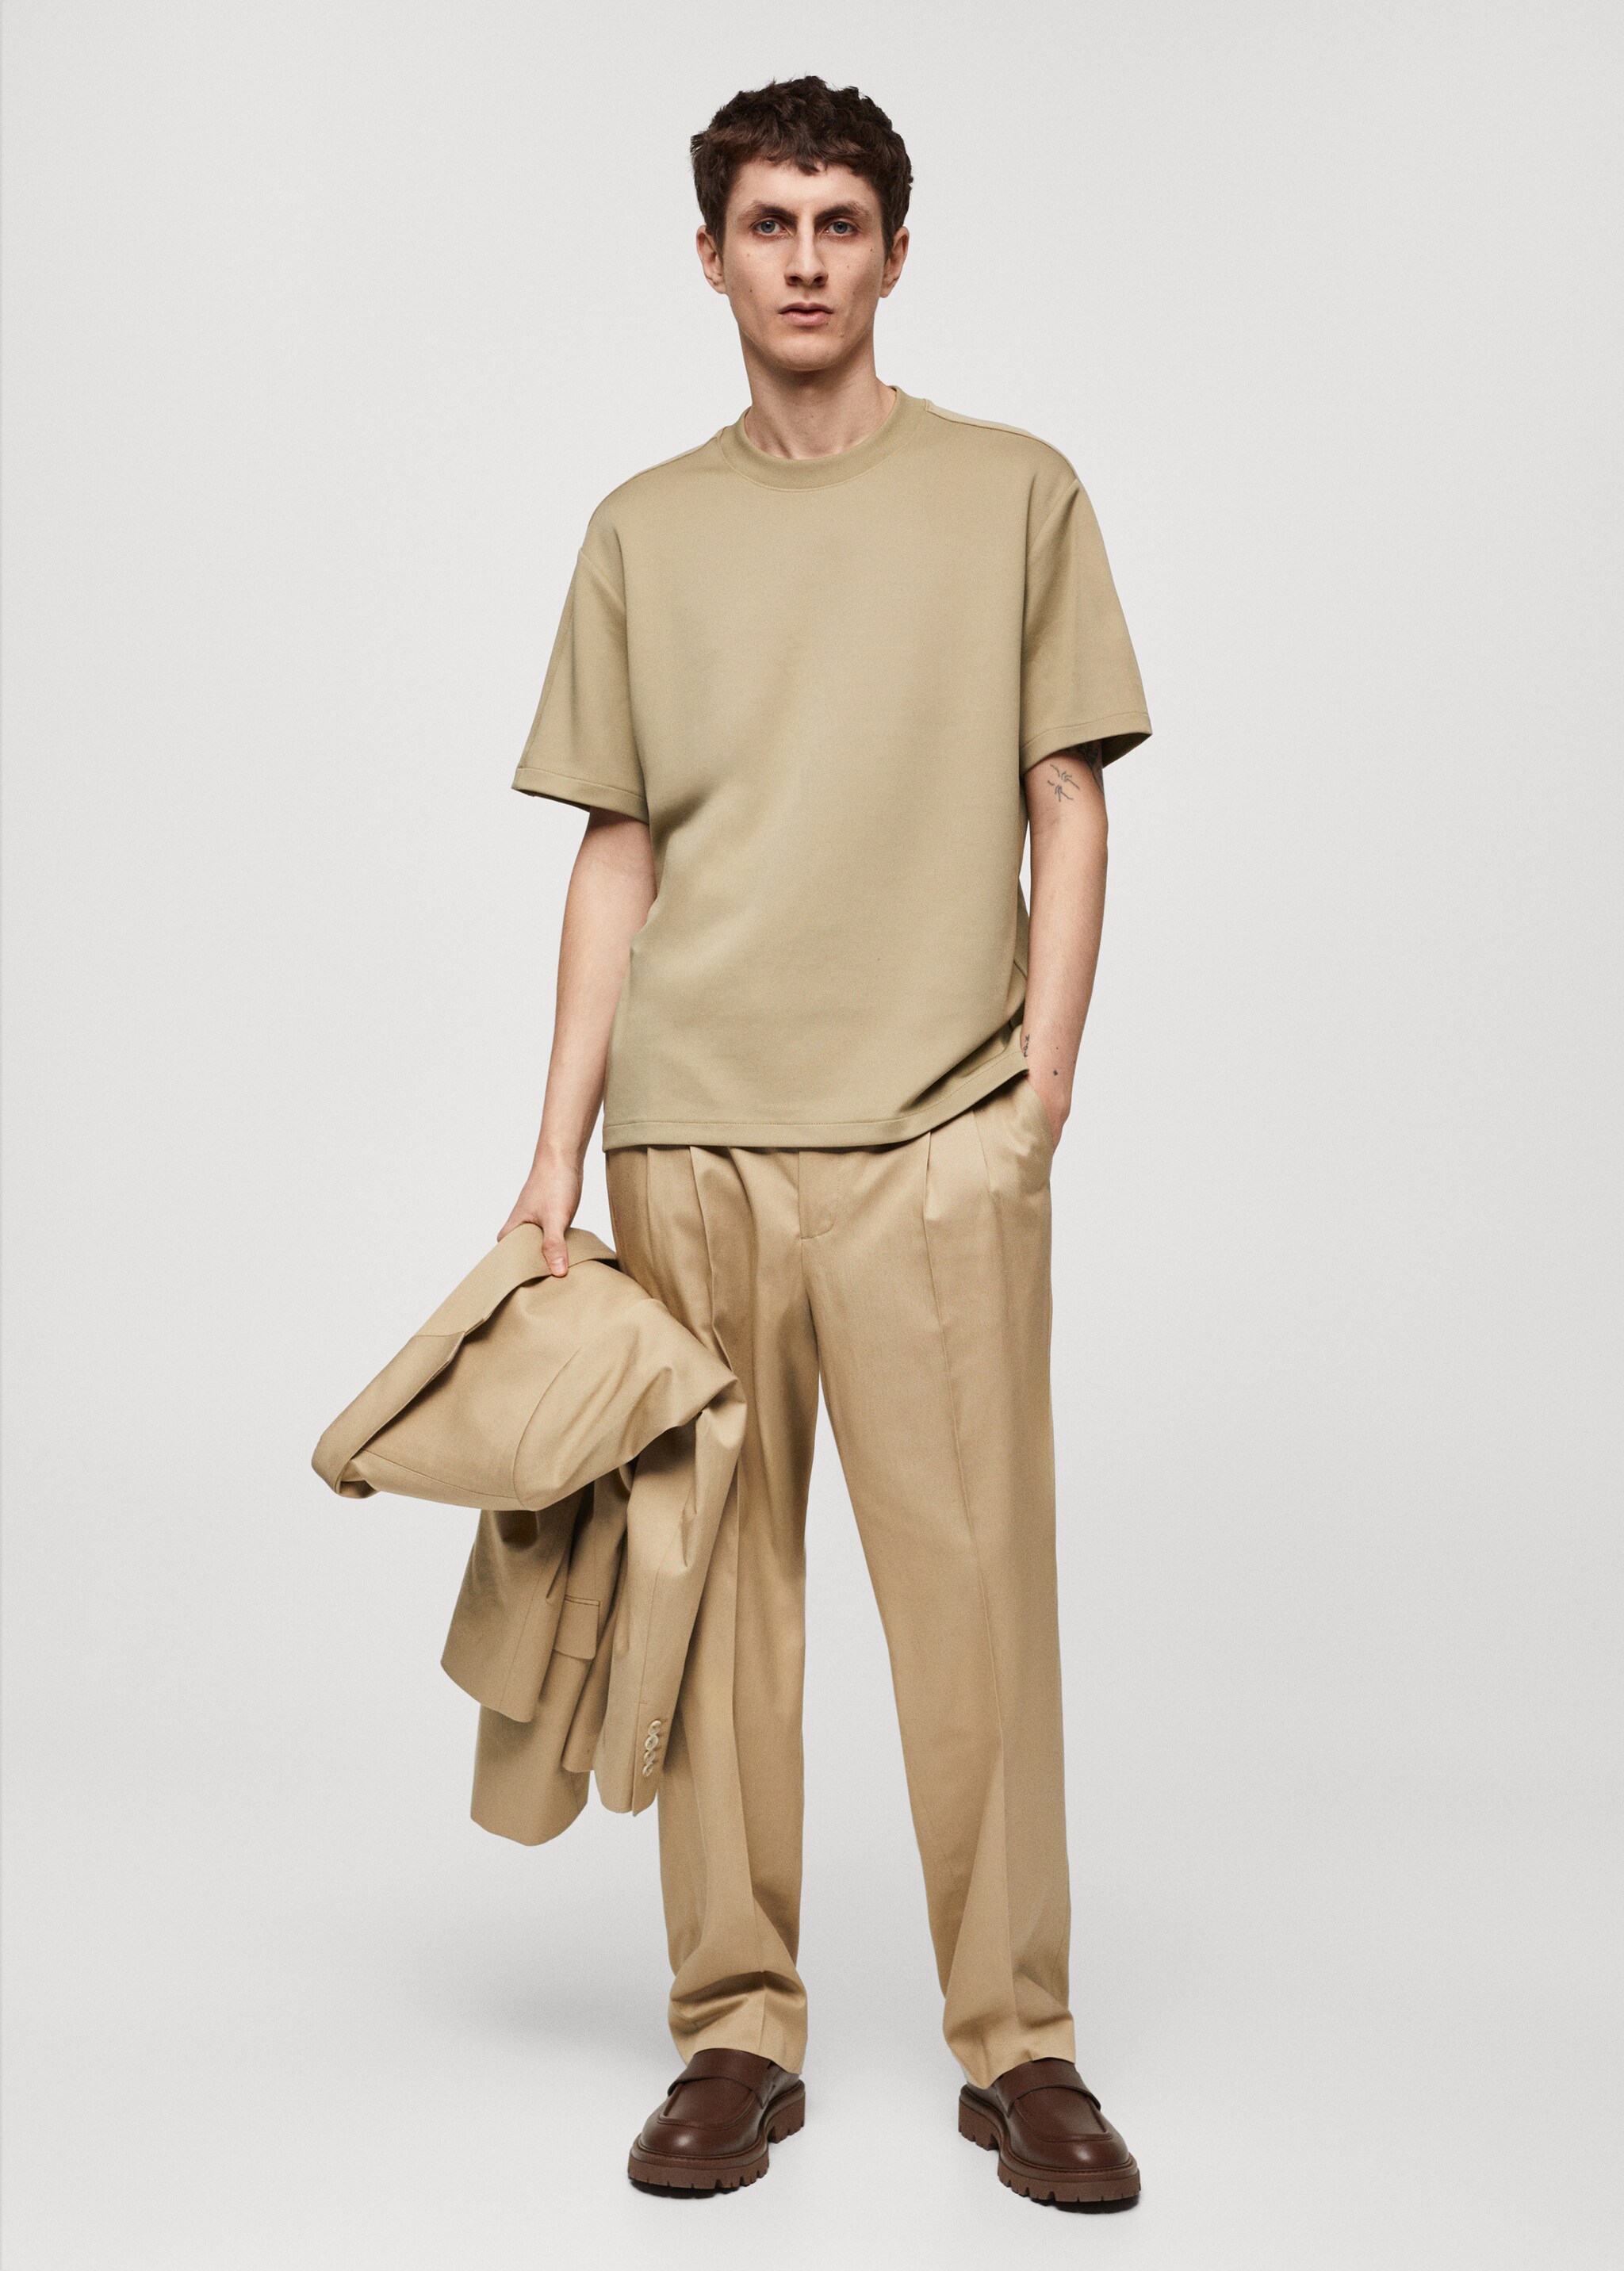 Relaxed fit stretch fabric T-shirt - General plane